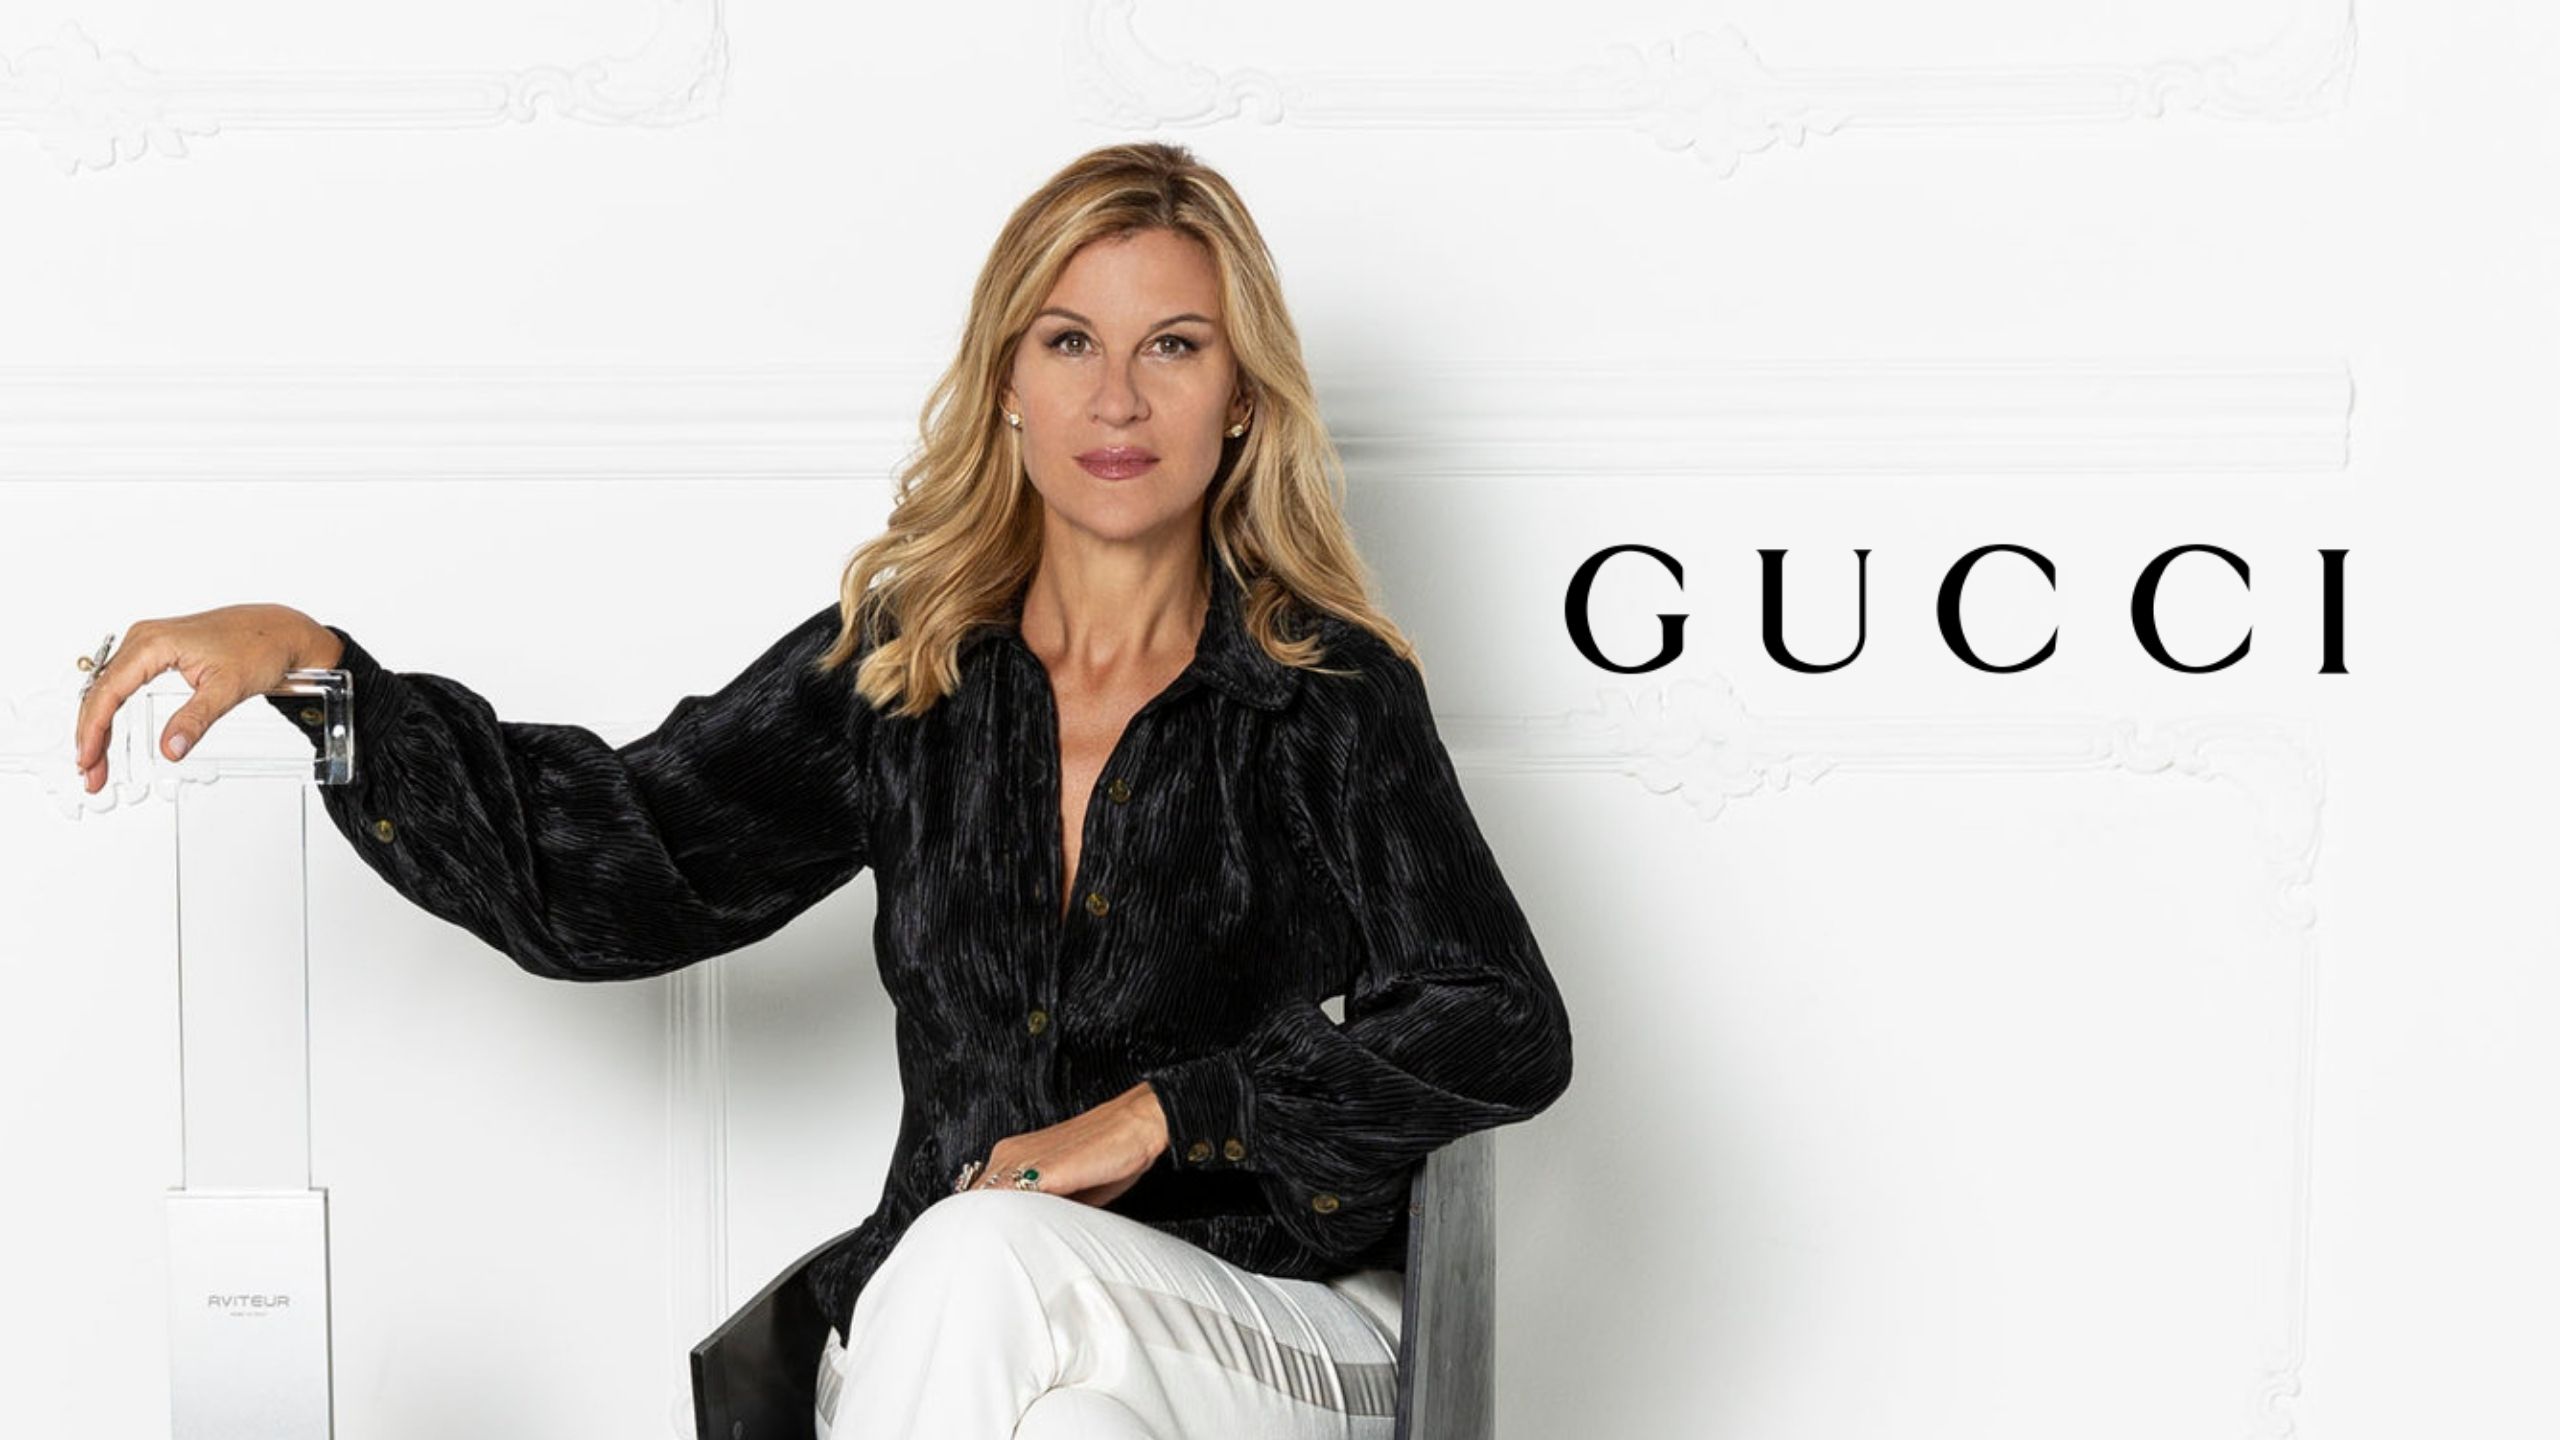 Alexandra Zarini, The Gucci Heir Alleges Sexual Abuse by stepfather